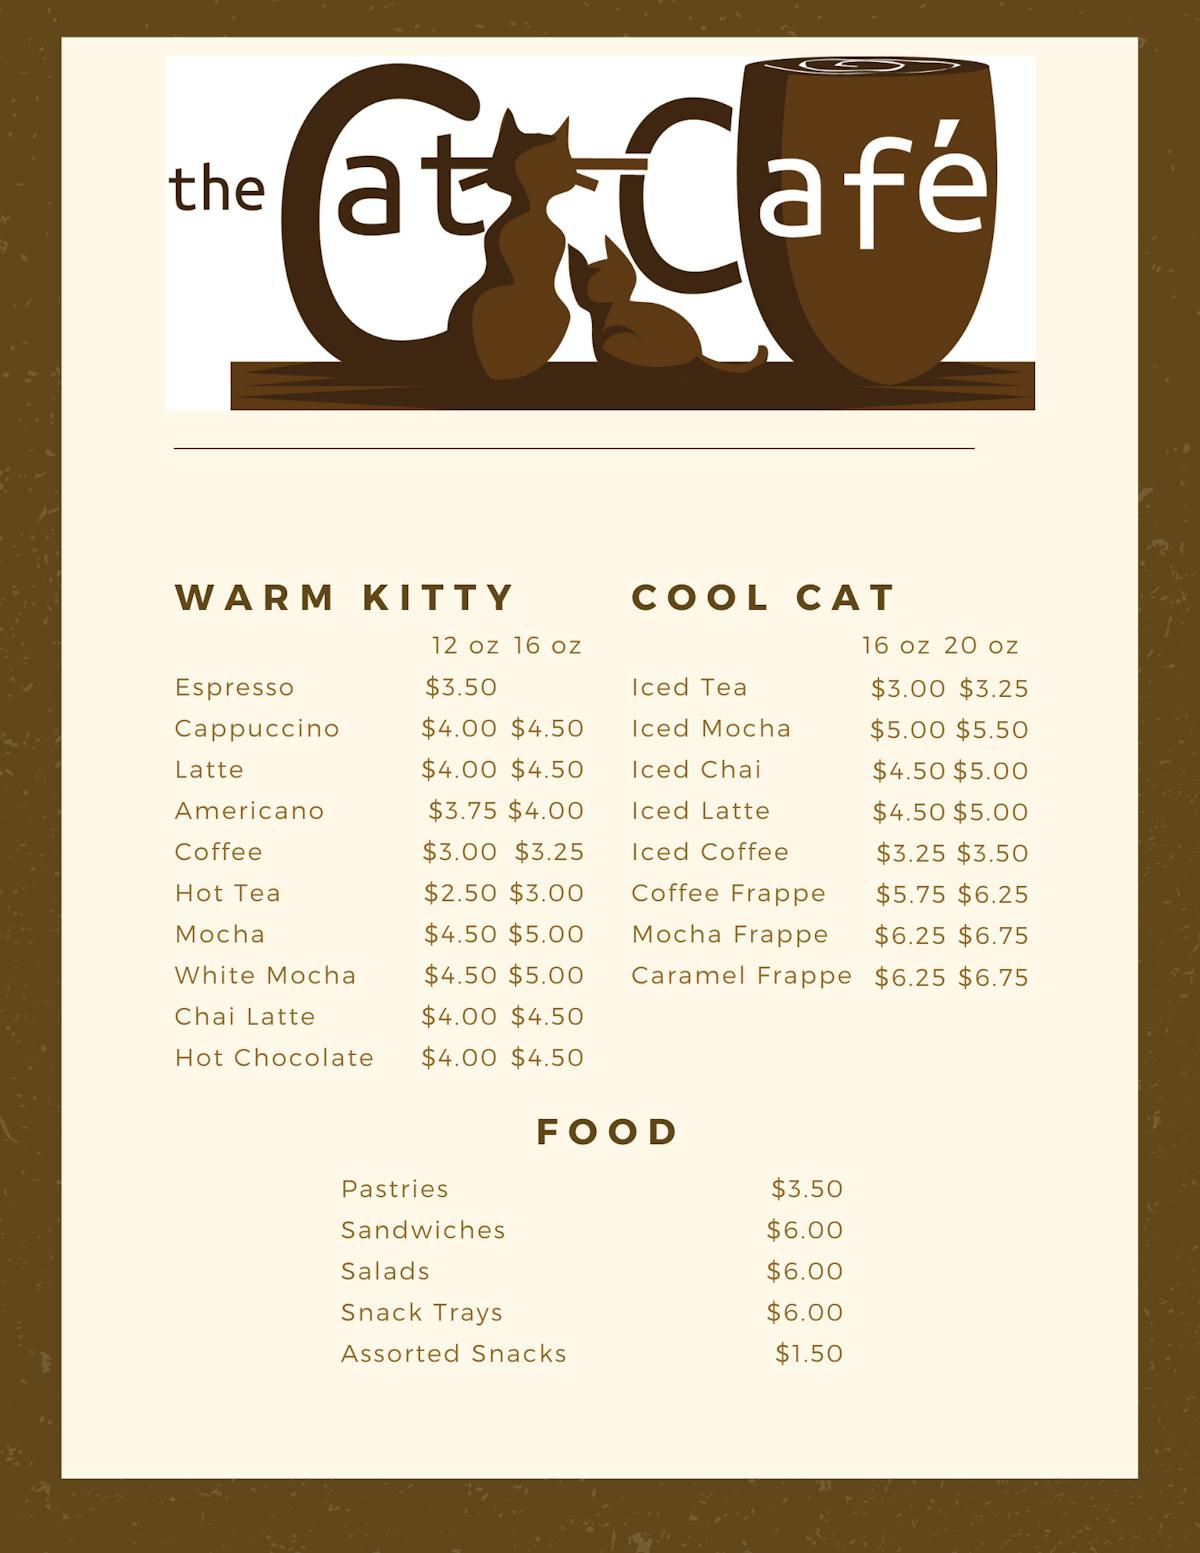 Cat Cafe Ideas Gifts & Merchandise for Sale